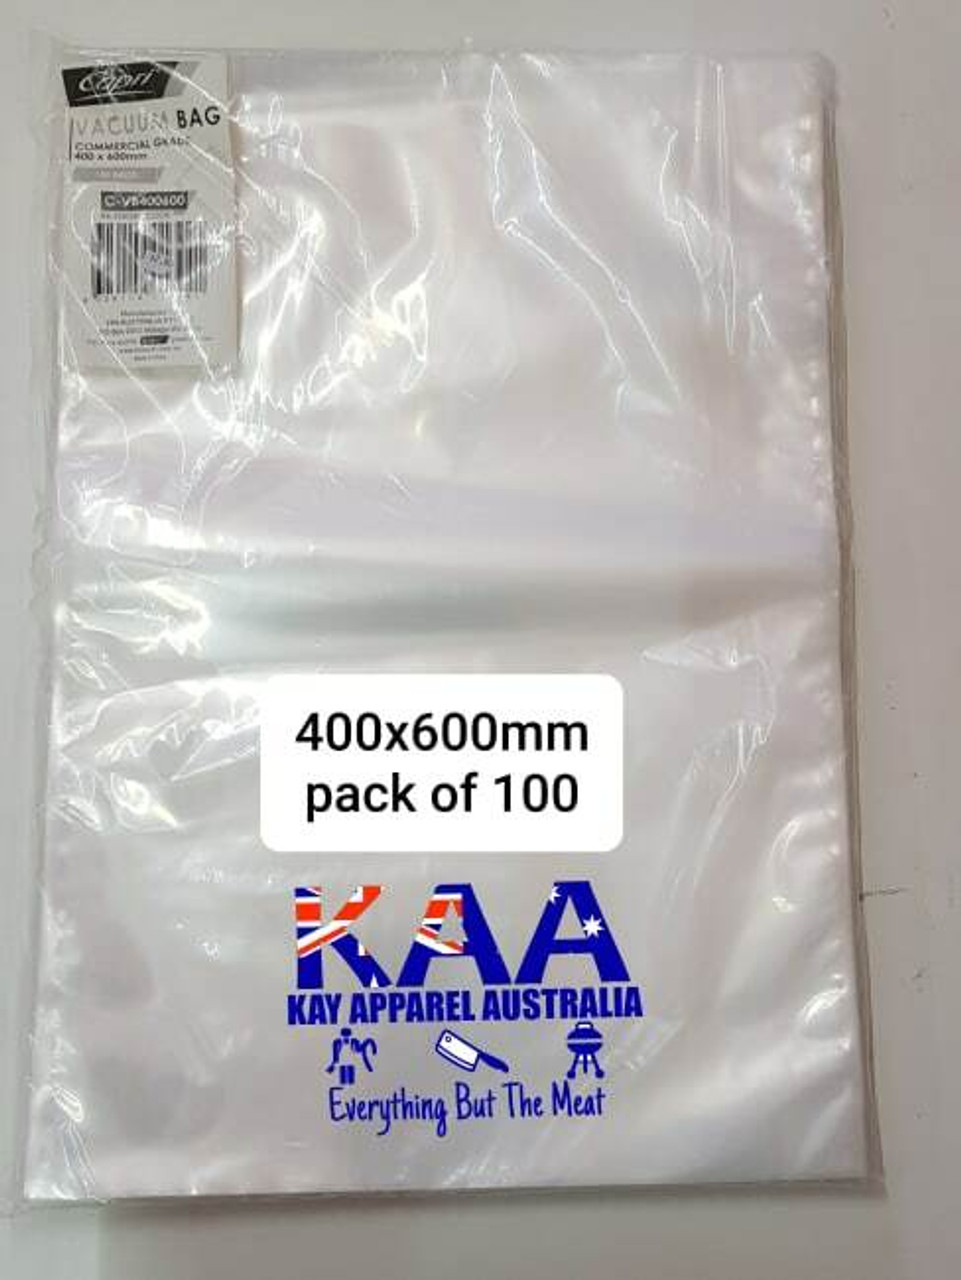 Cryovac Bags  Vacuum Pouches and Bags - Food Packaging - Australia Get  Packed